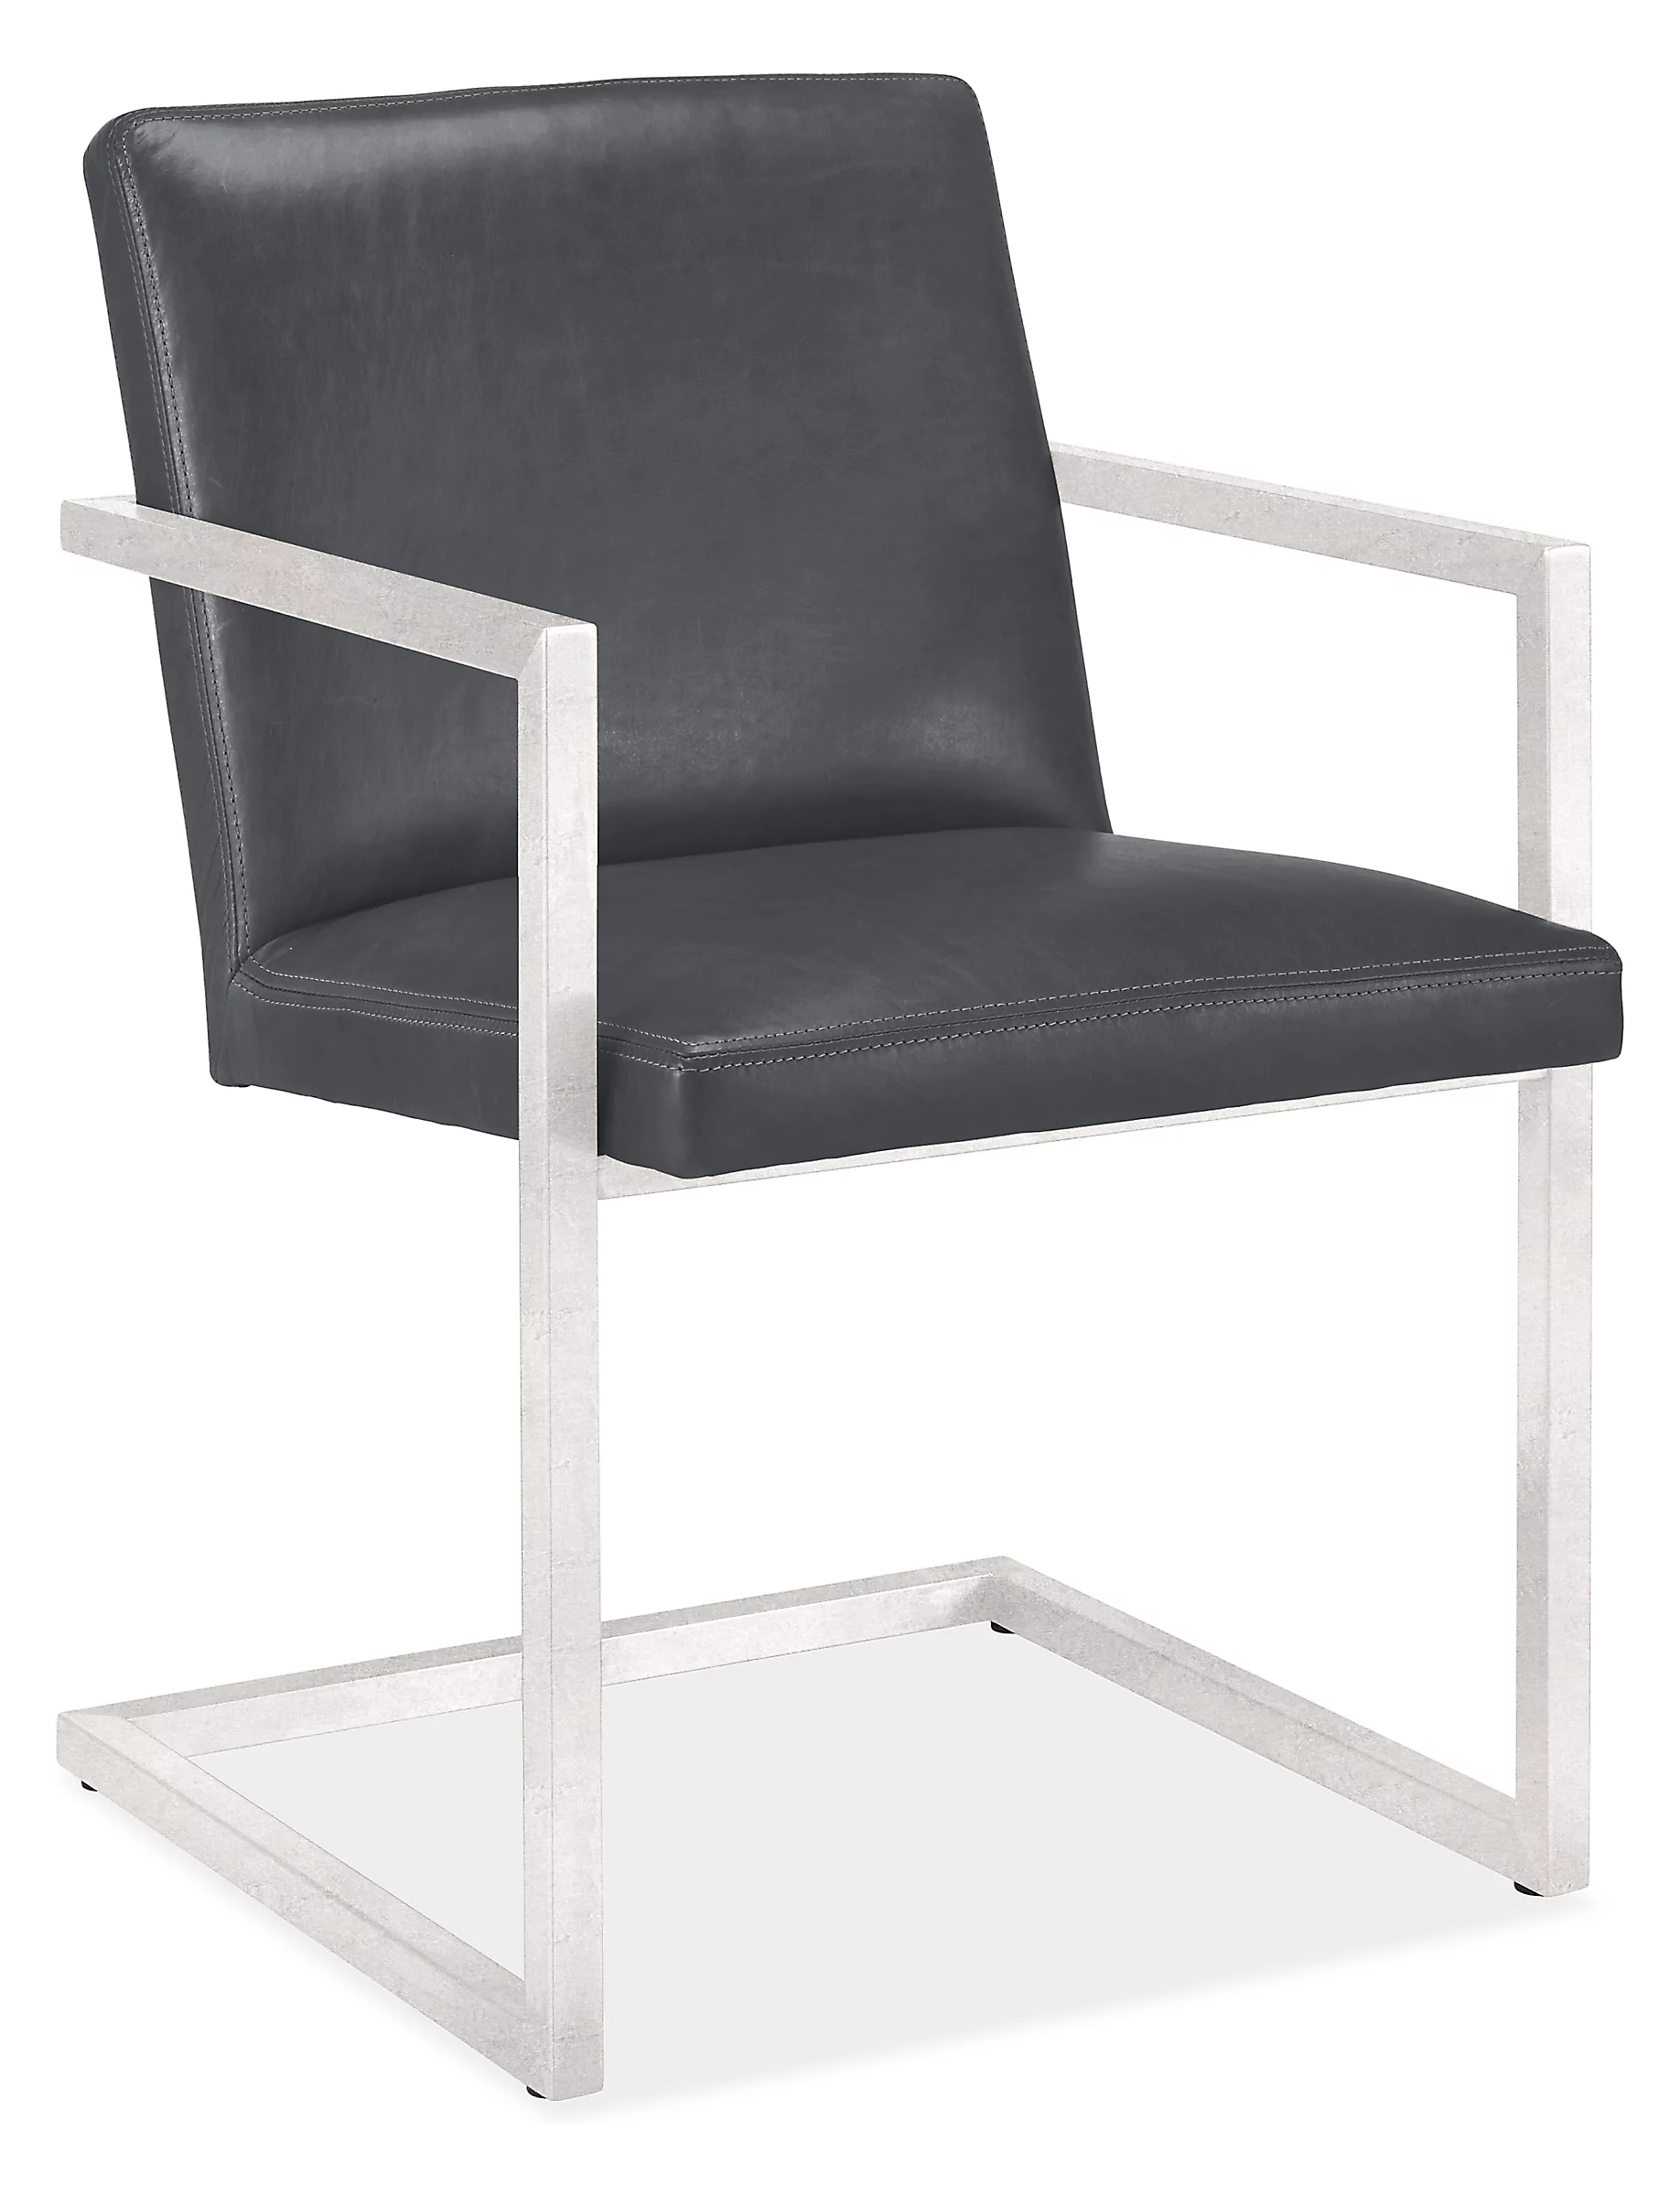 Lira Arm Chair in Lecco Smoke Leather with Stainless Steel